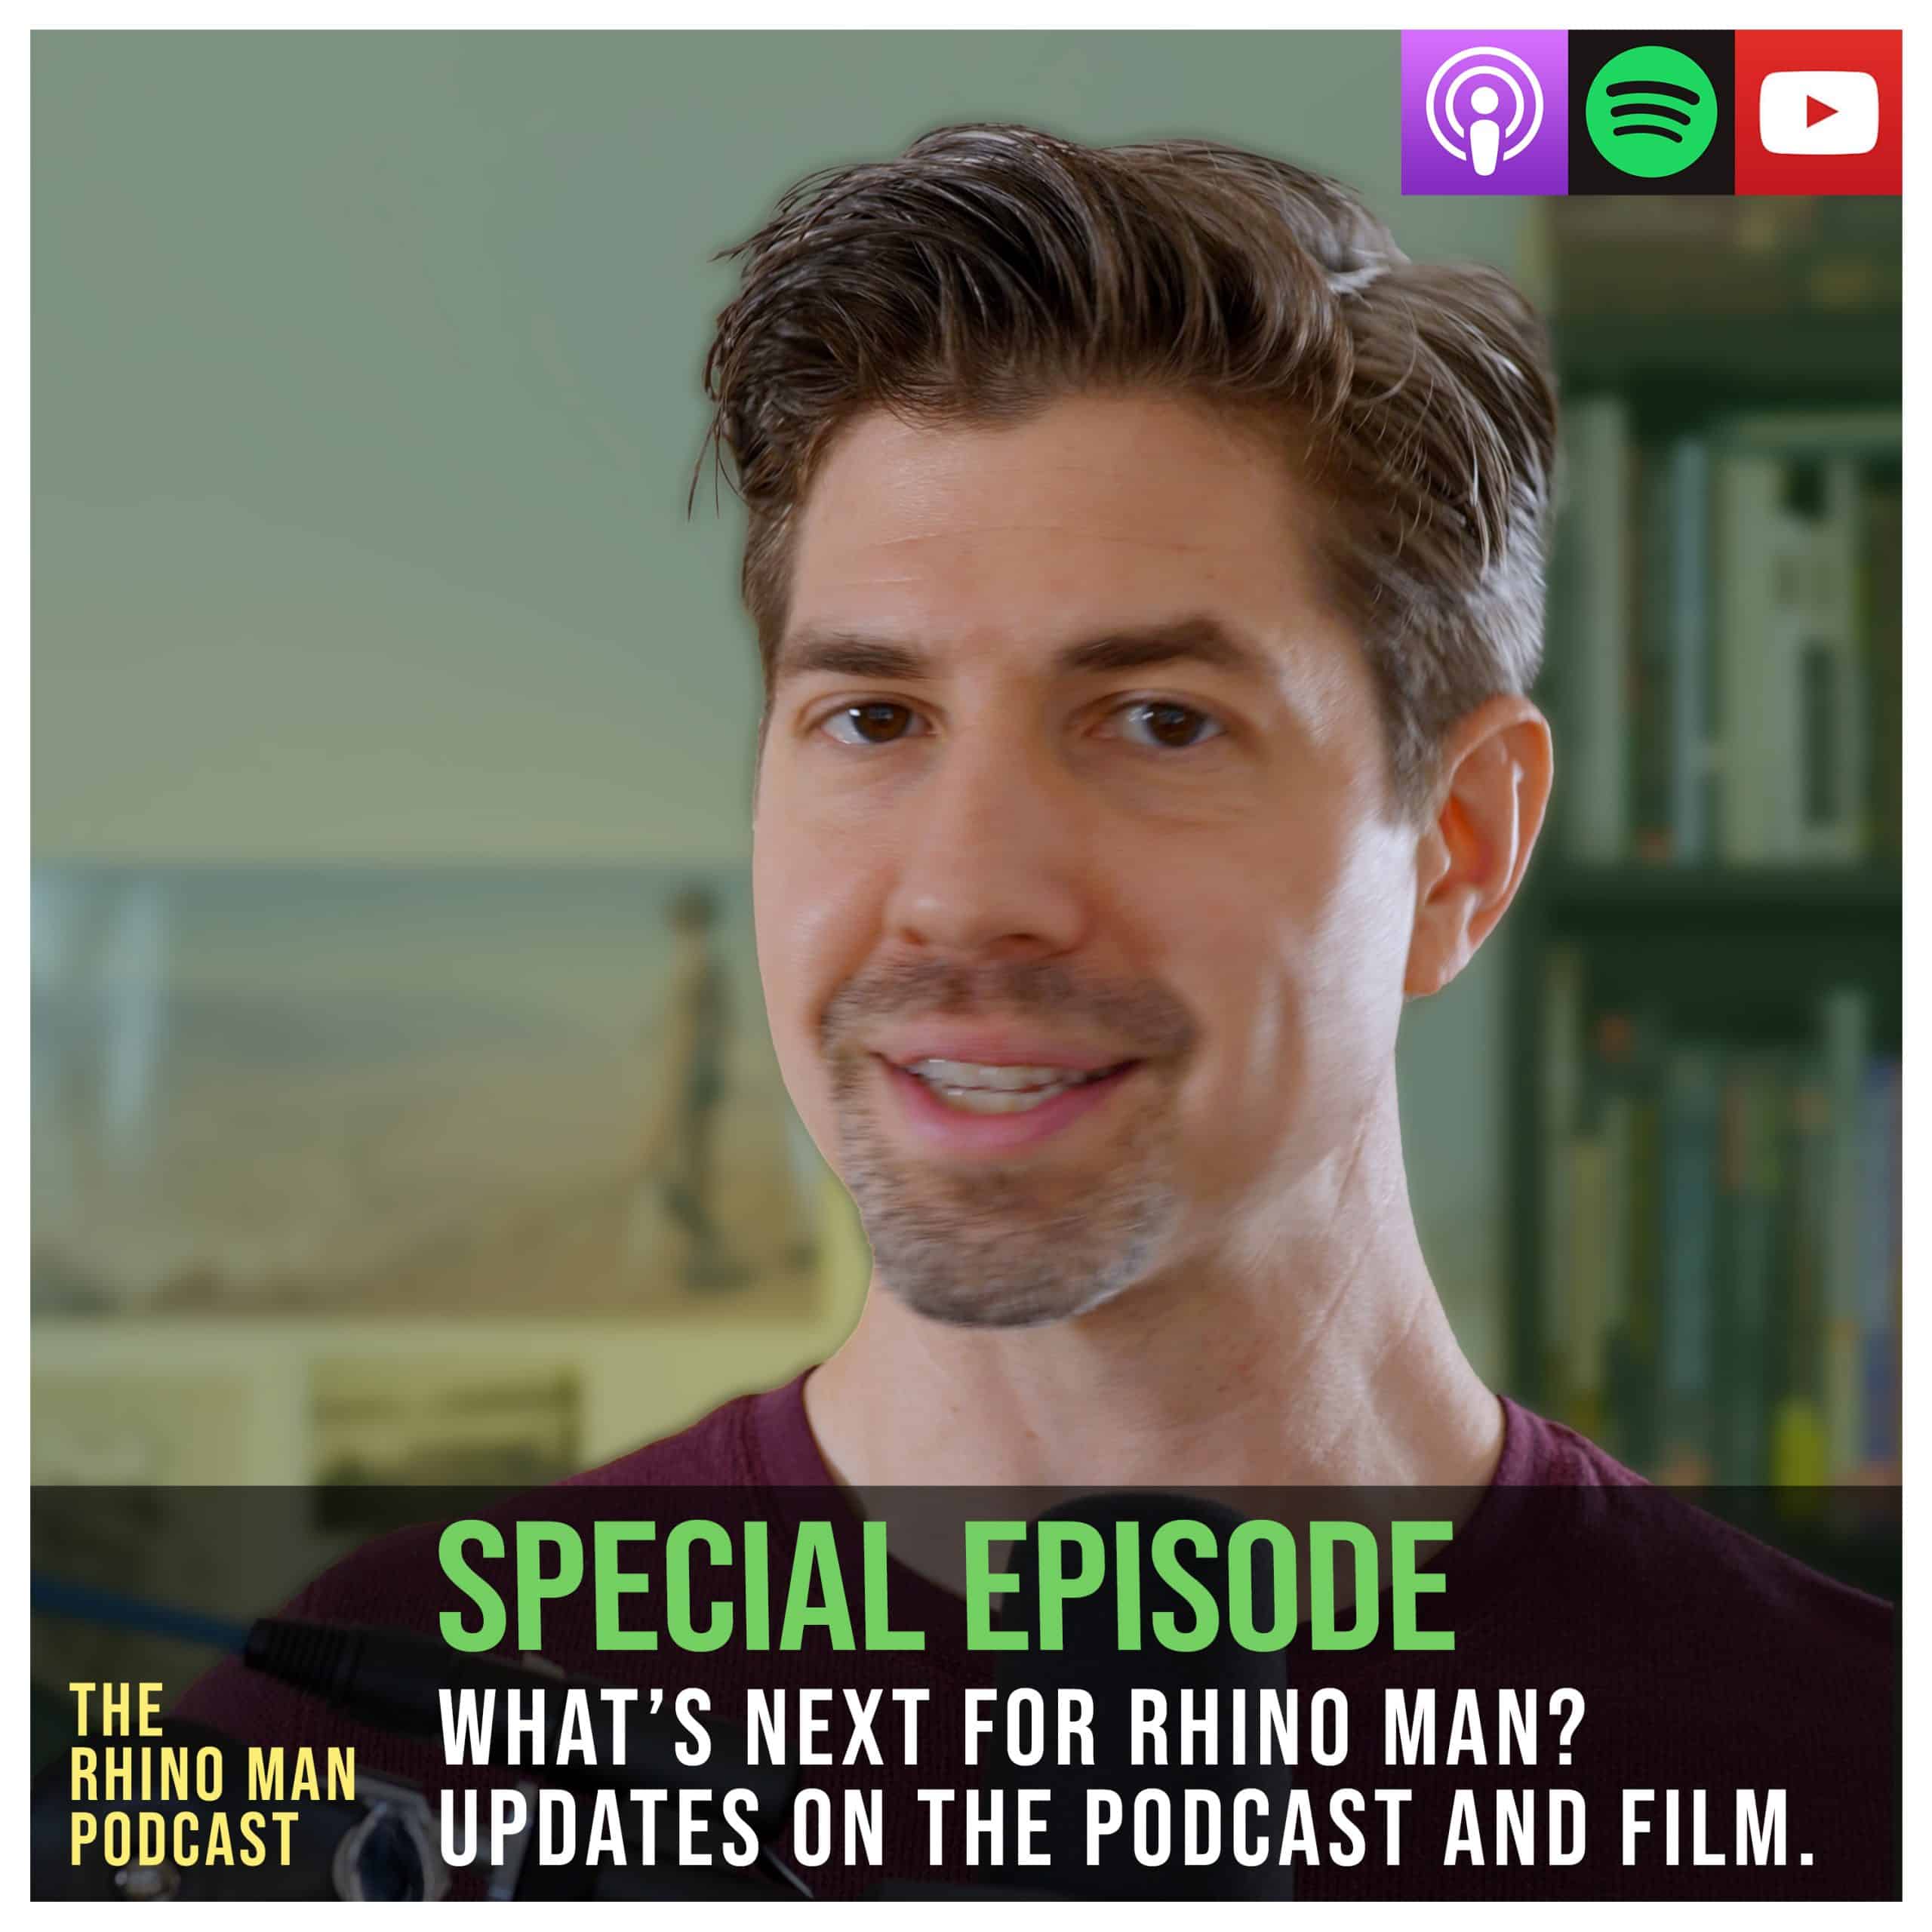 Special Episode – What’s Next for Rhino Man? Updates on the Podcast and Film.